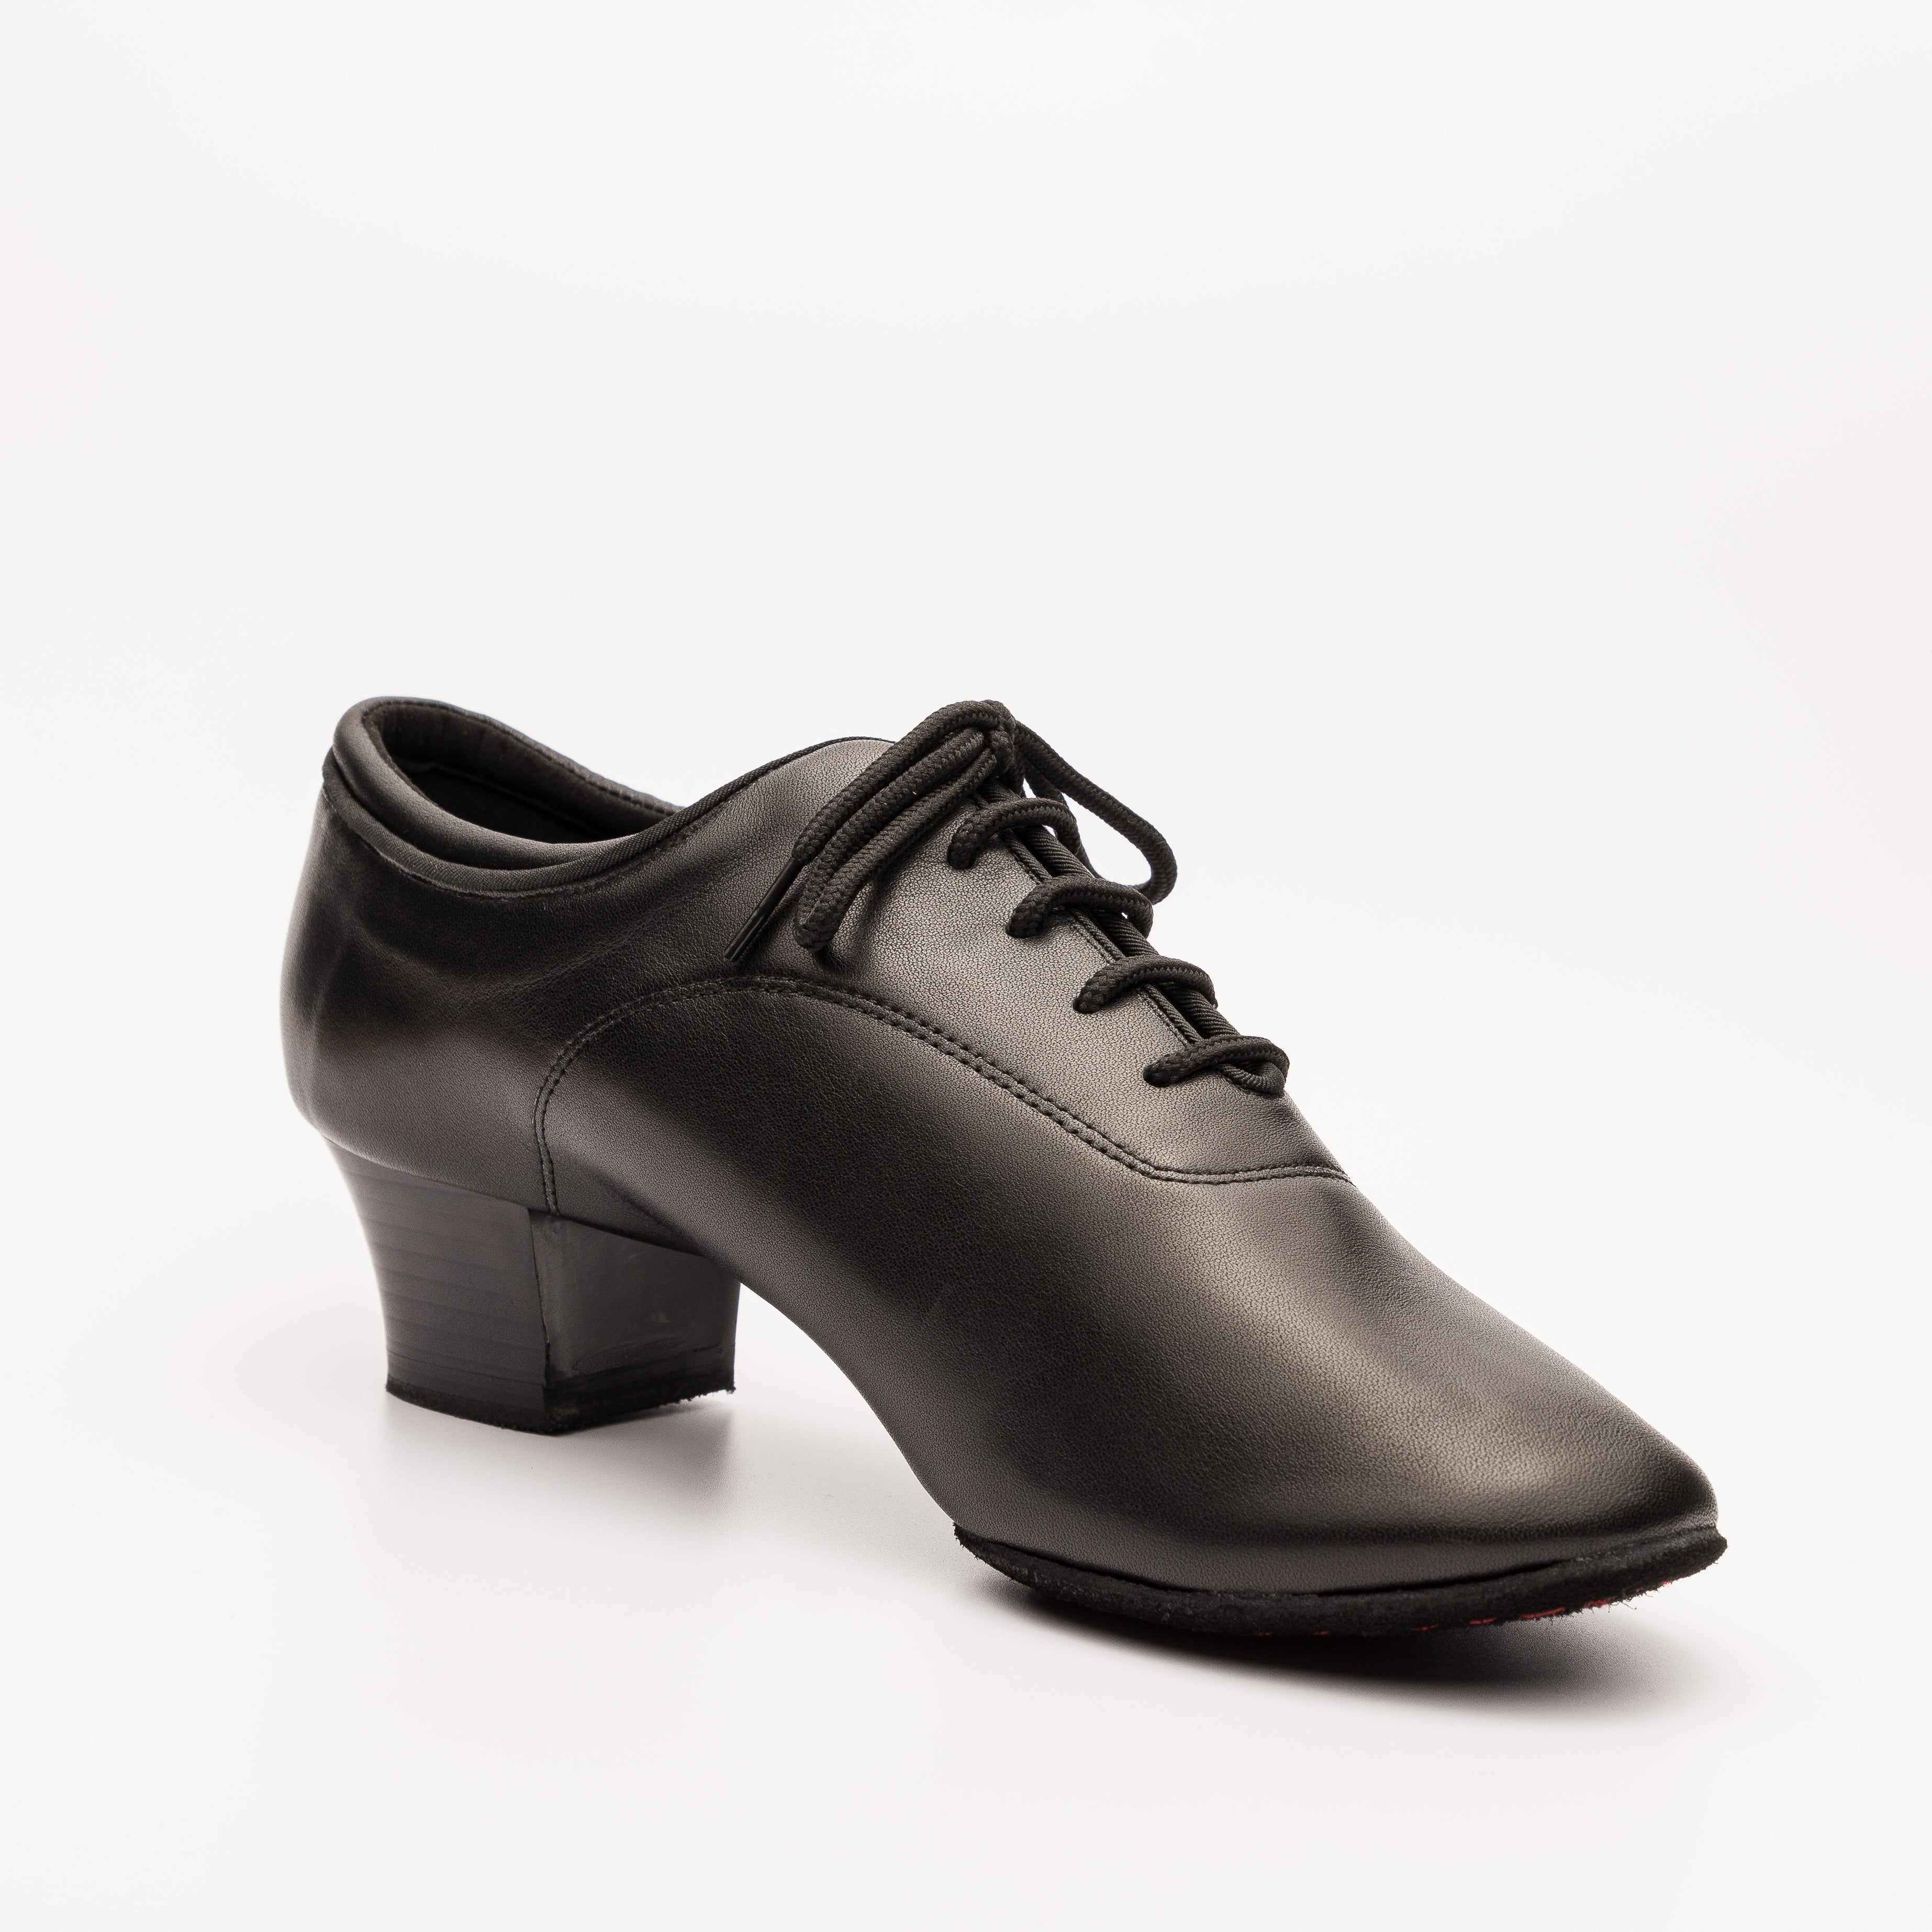 Men's shoes PRO Edition Leather - High Heel